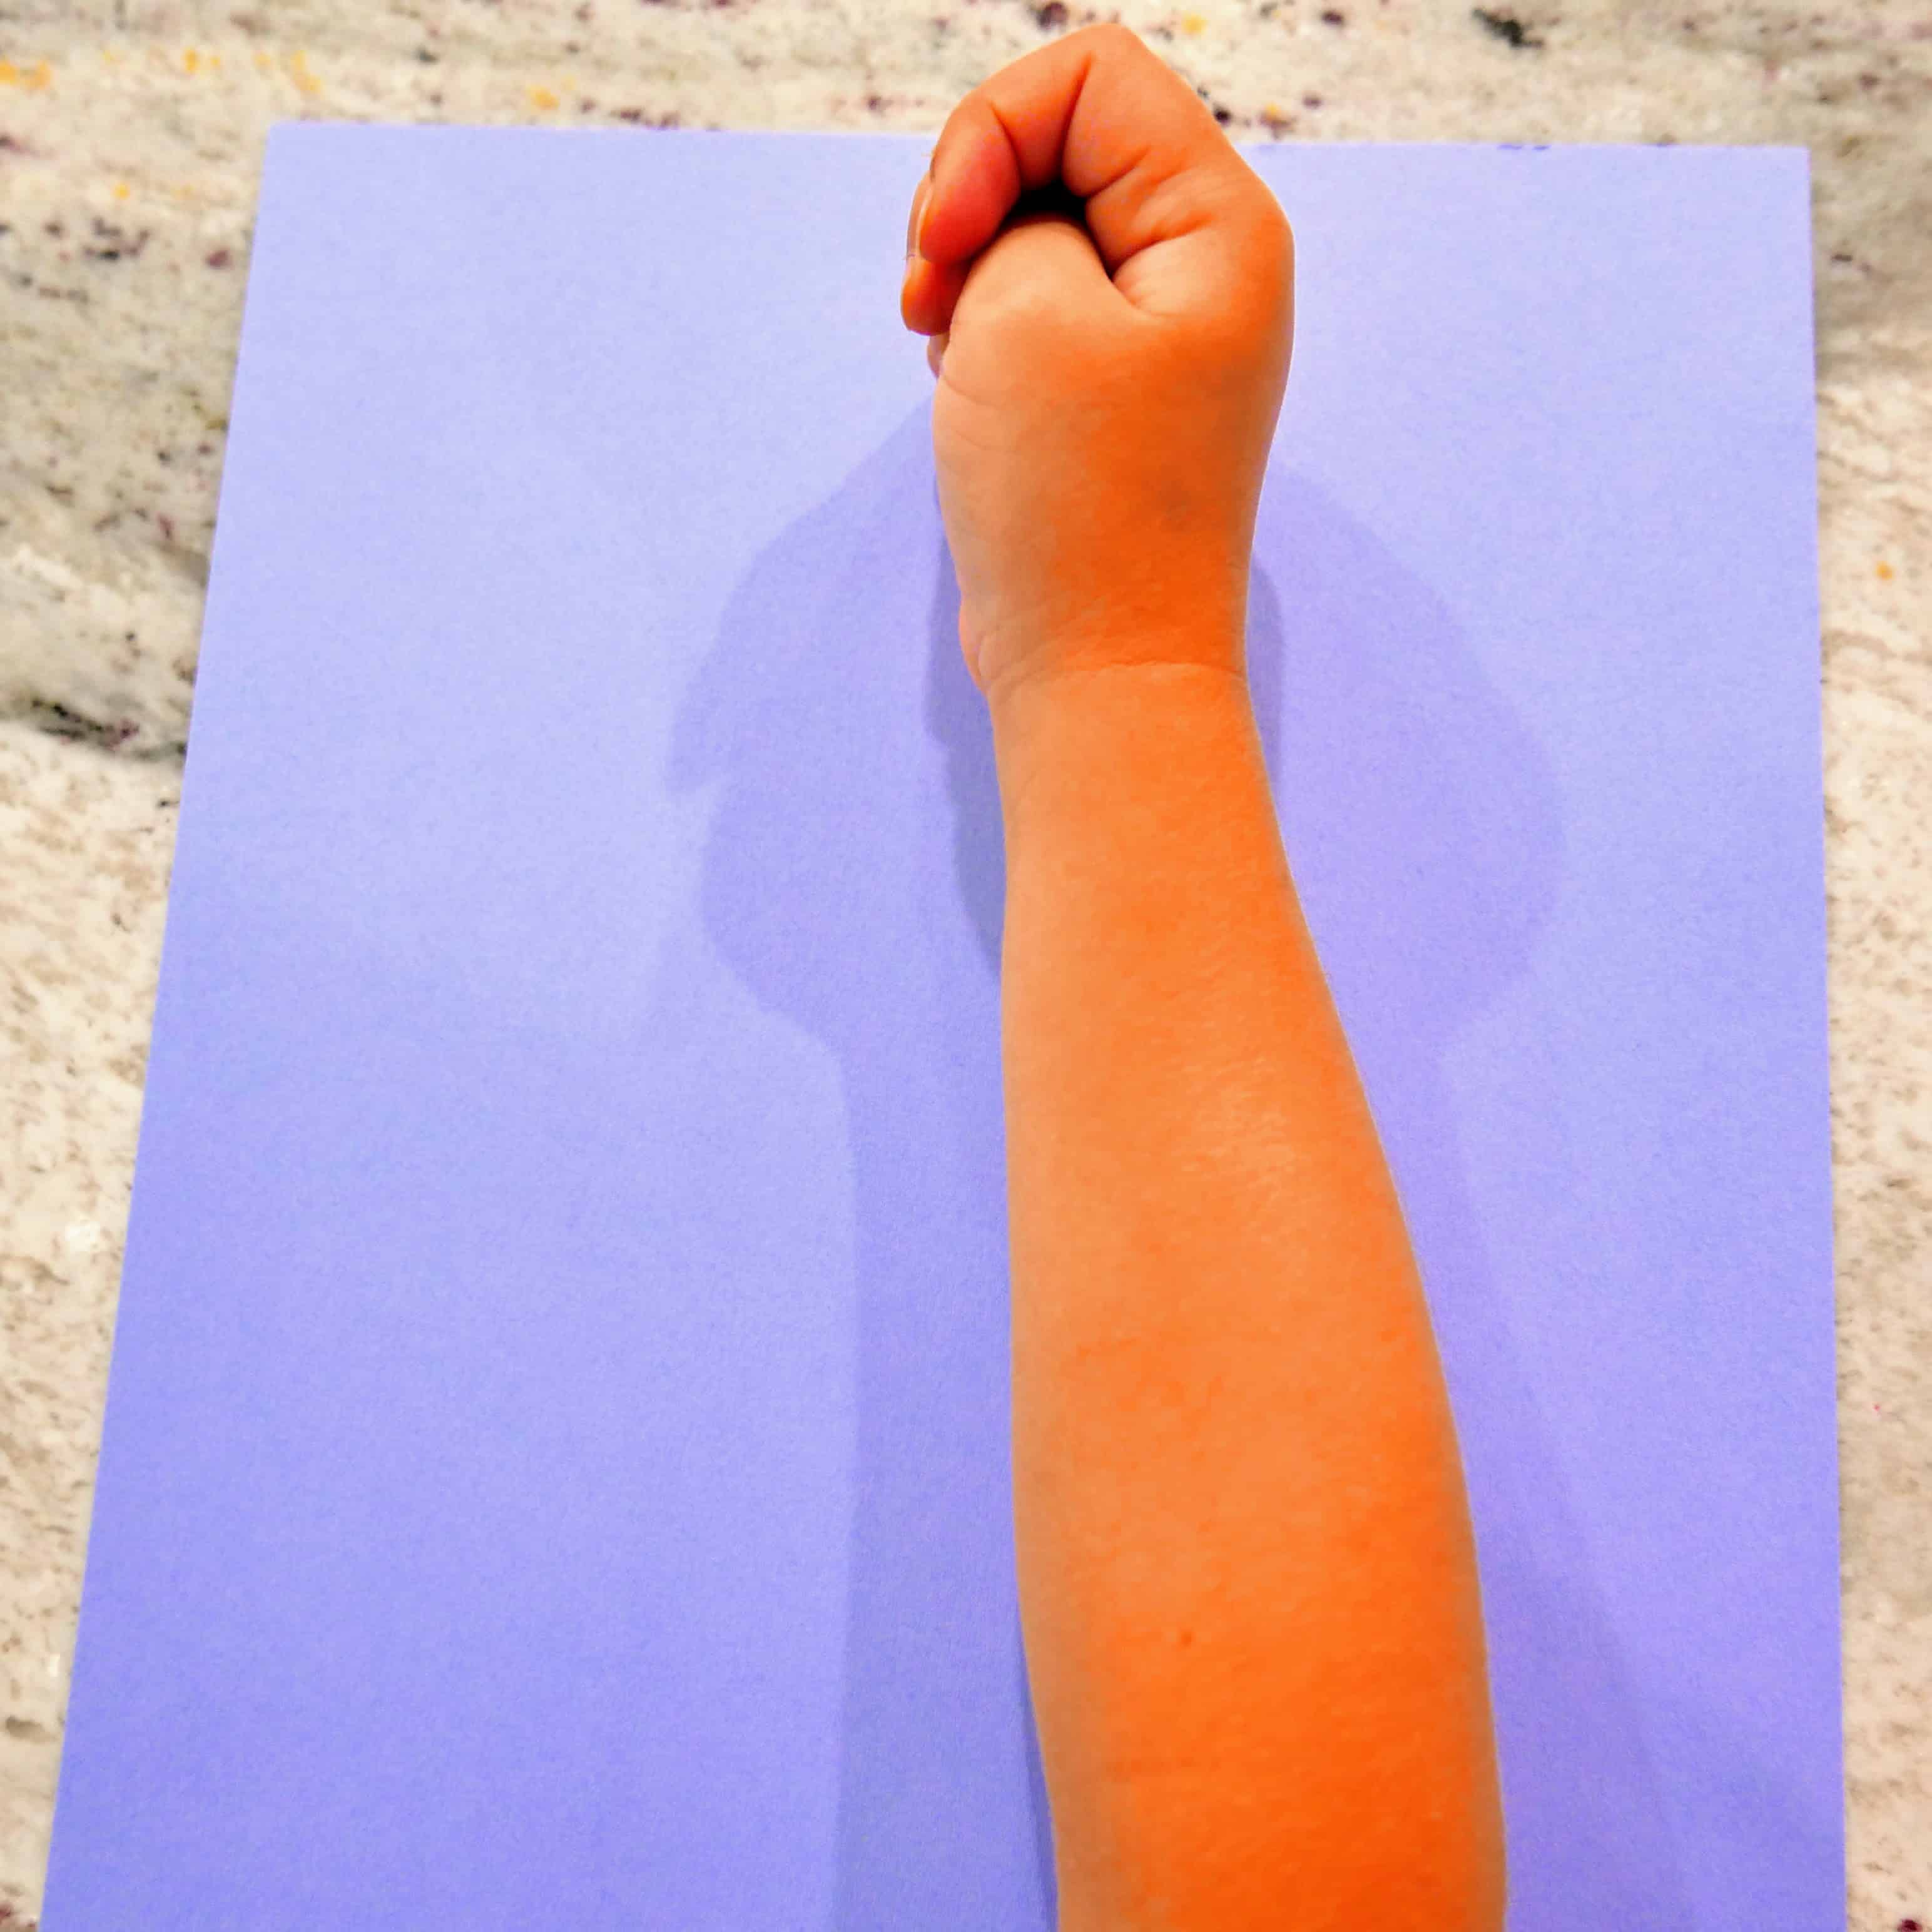 child's arm on top of cardstock paper